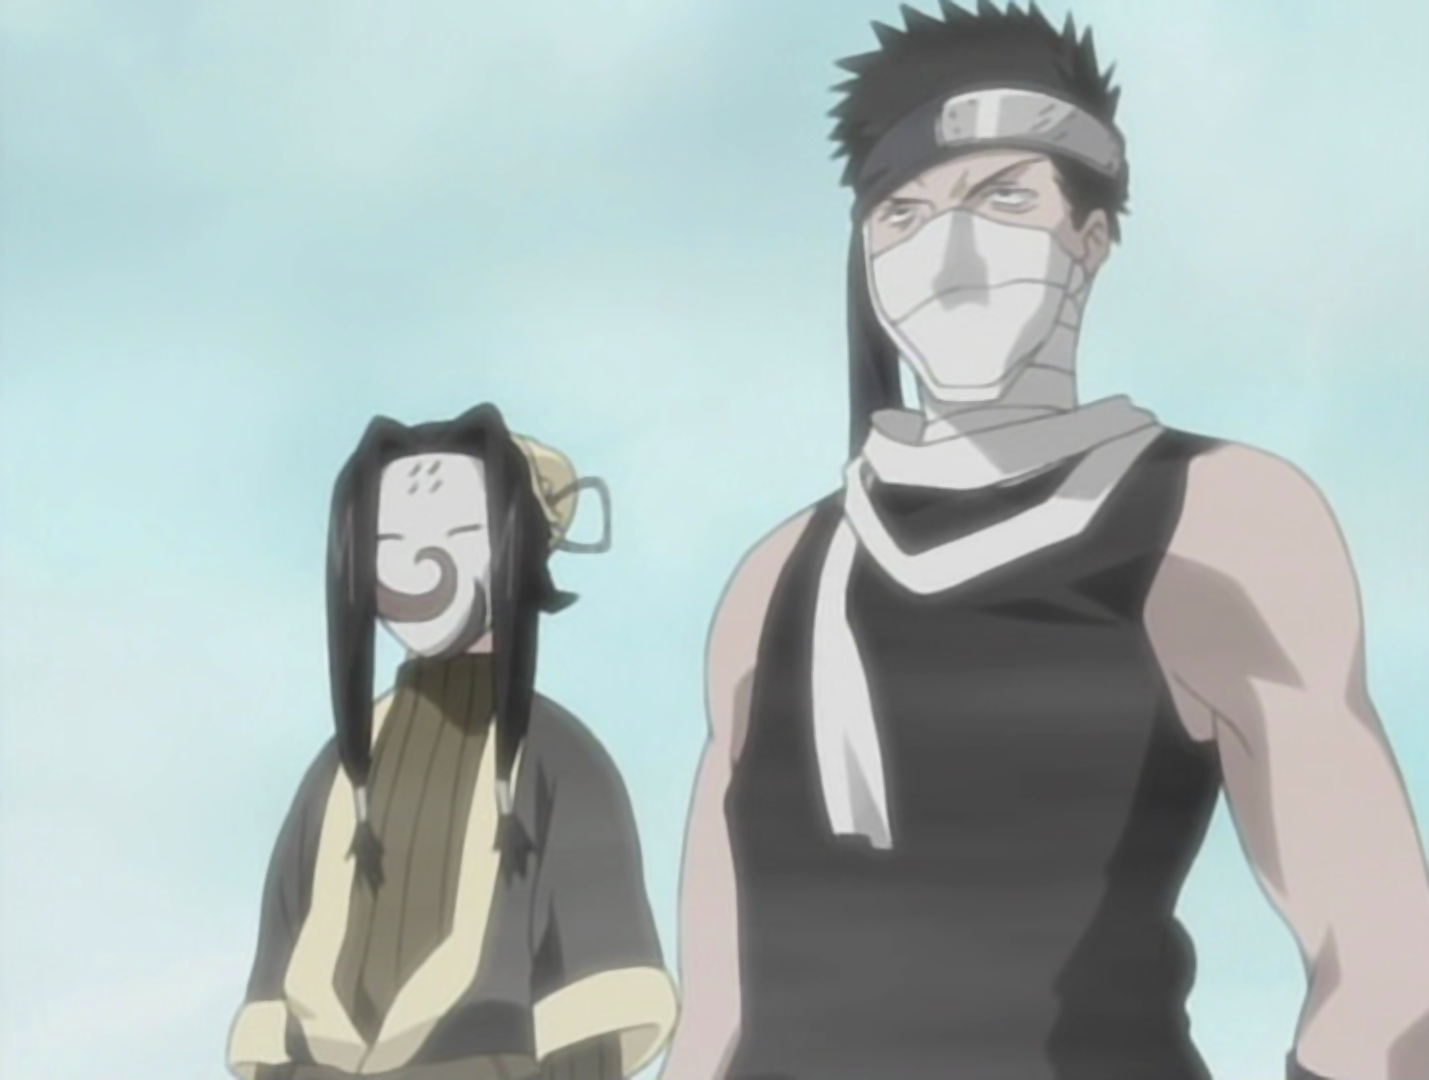 I want to start watching Naruto but without the fillers, is this